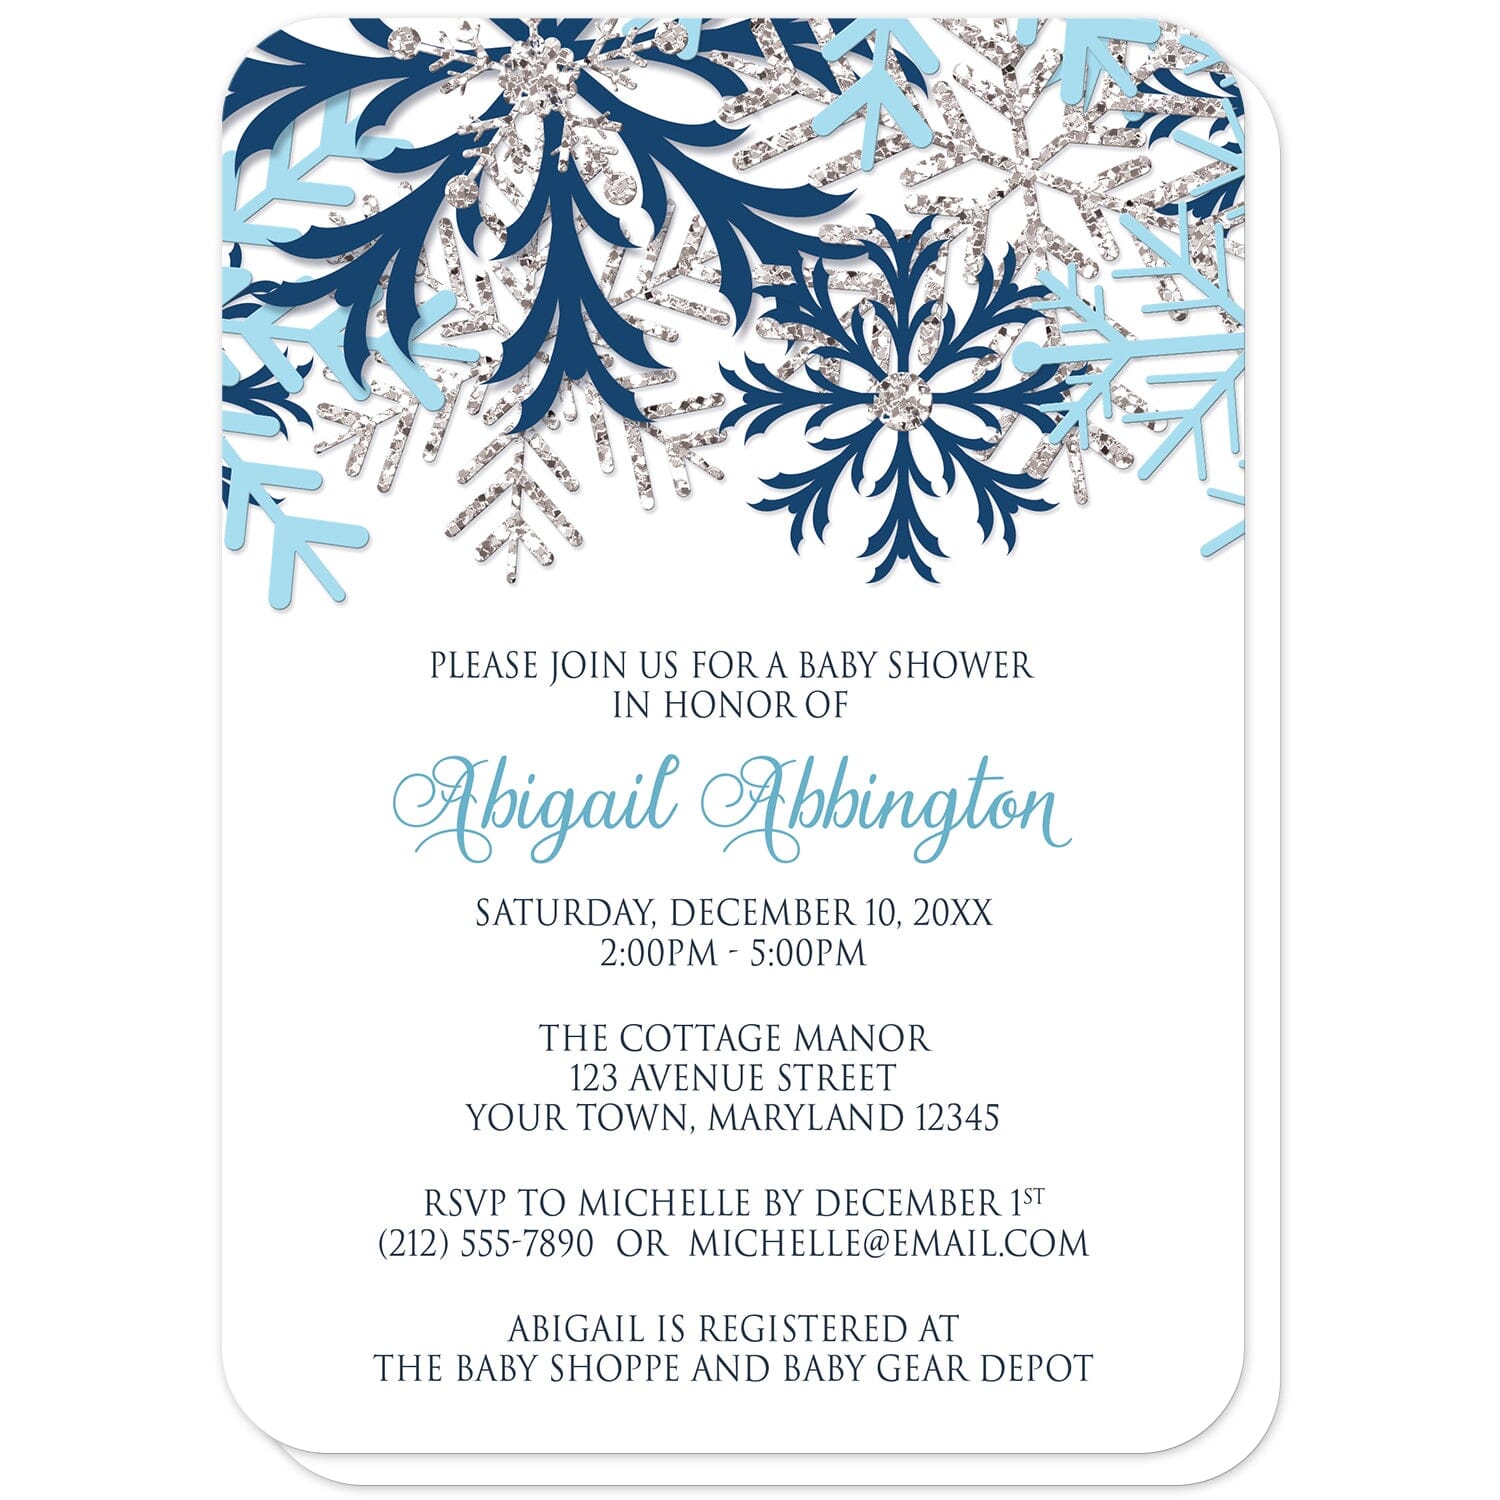 Winter Blue Silver Snowflake Baby Shower Invitations (with rounded corners) at Artistically Invited. Beautiful winter blue silver snowflake baby shower invitations designed with navy blue, aqua blue, and silver-colored glitter-illustrated snowflakes along the top over a white background. Your personalized baby shower celebration details are custom printed in blue and gray below the pretty snowflakes.